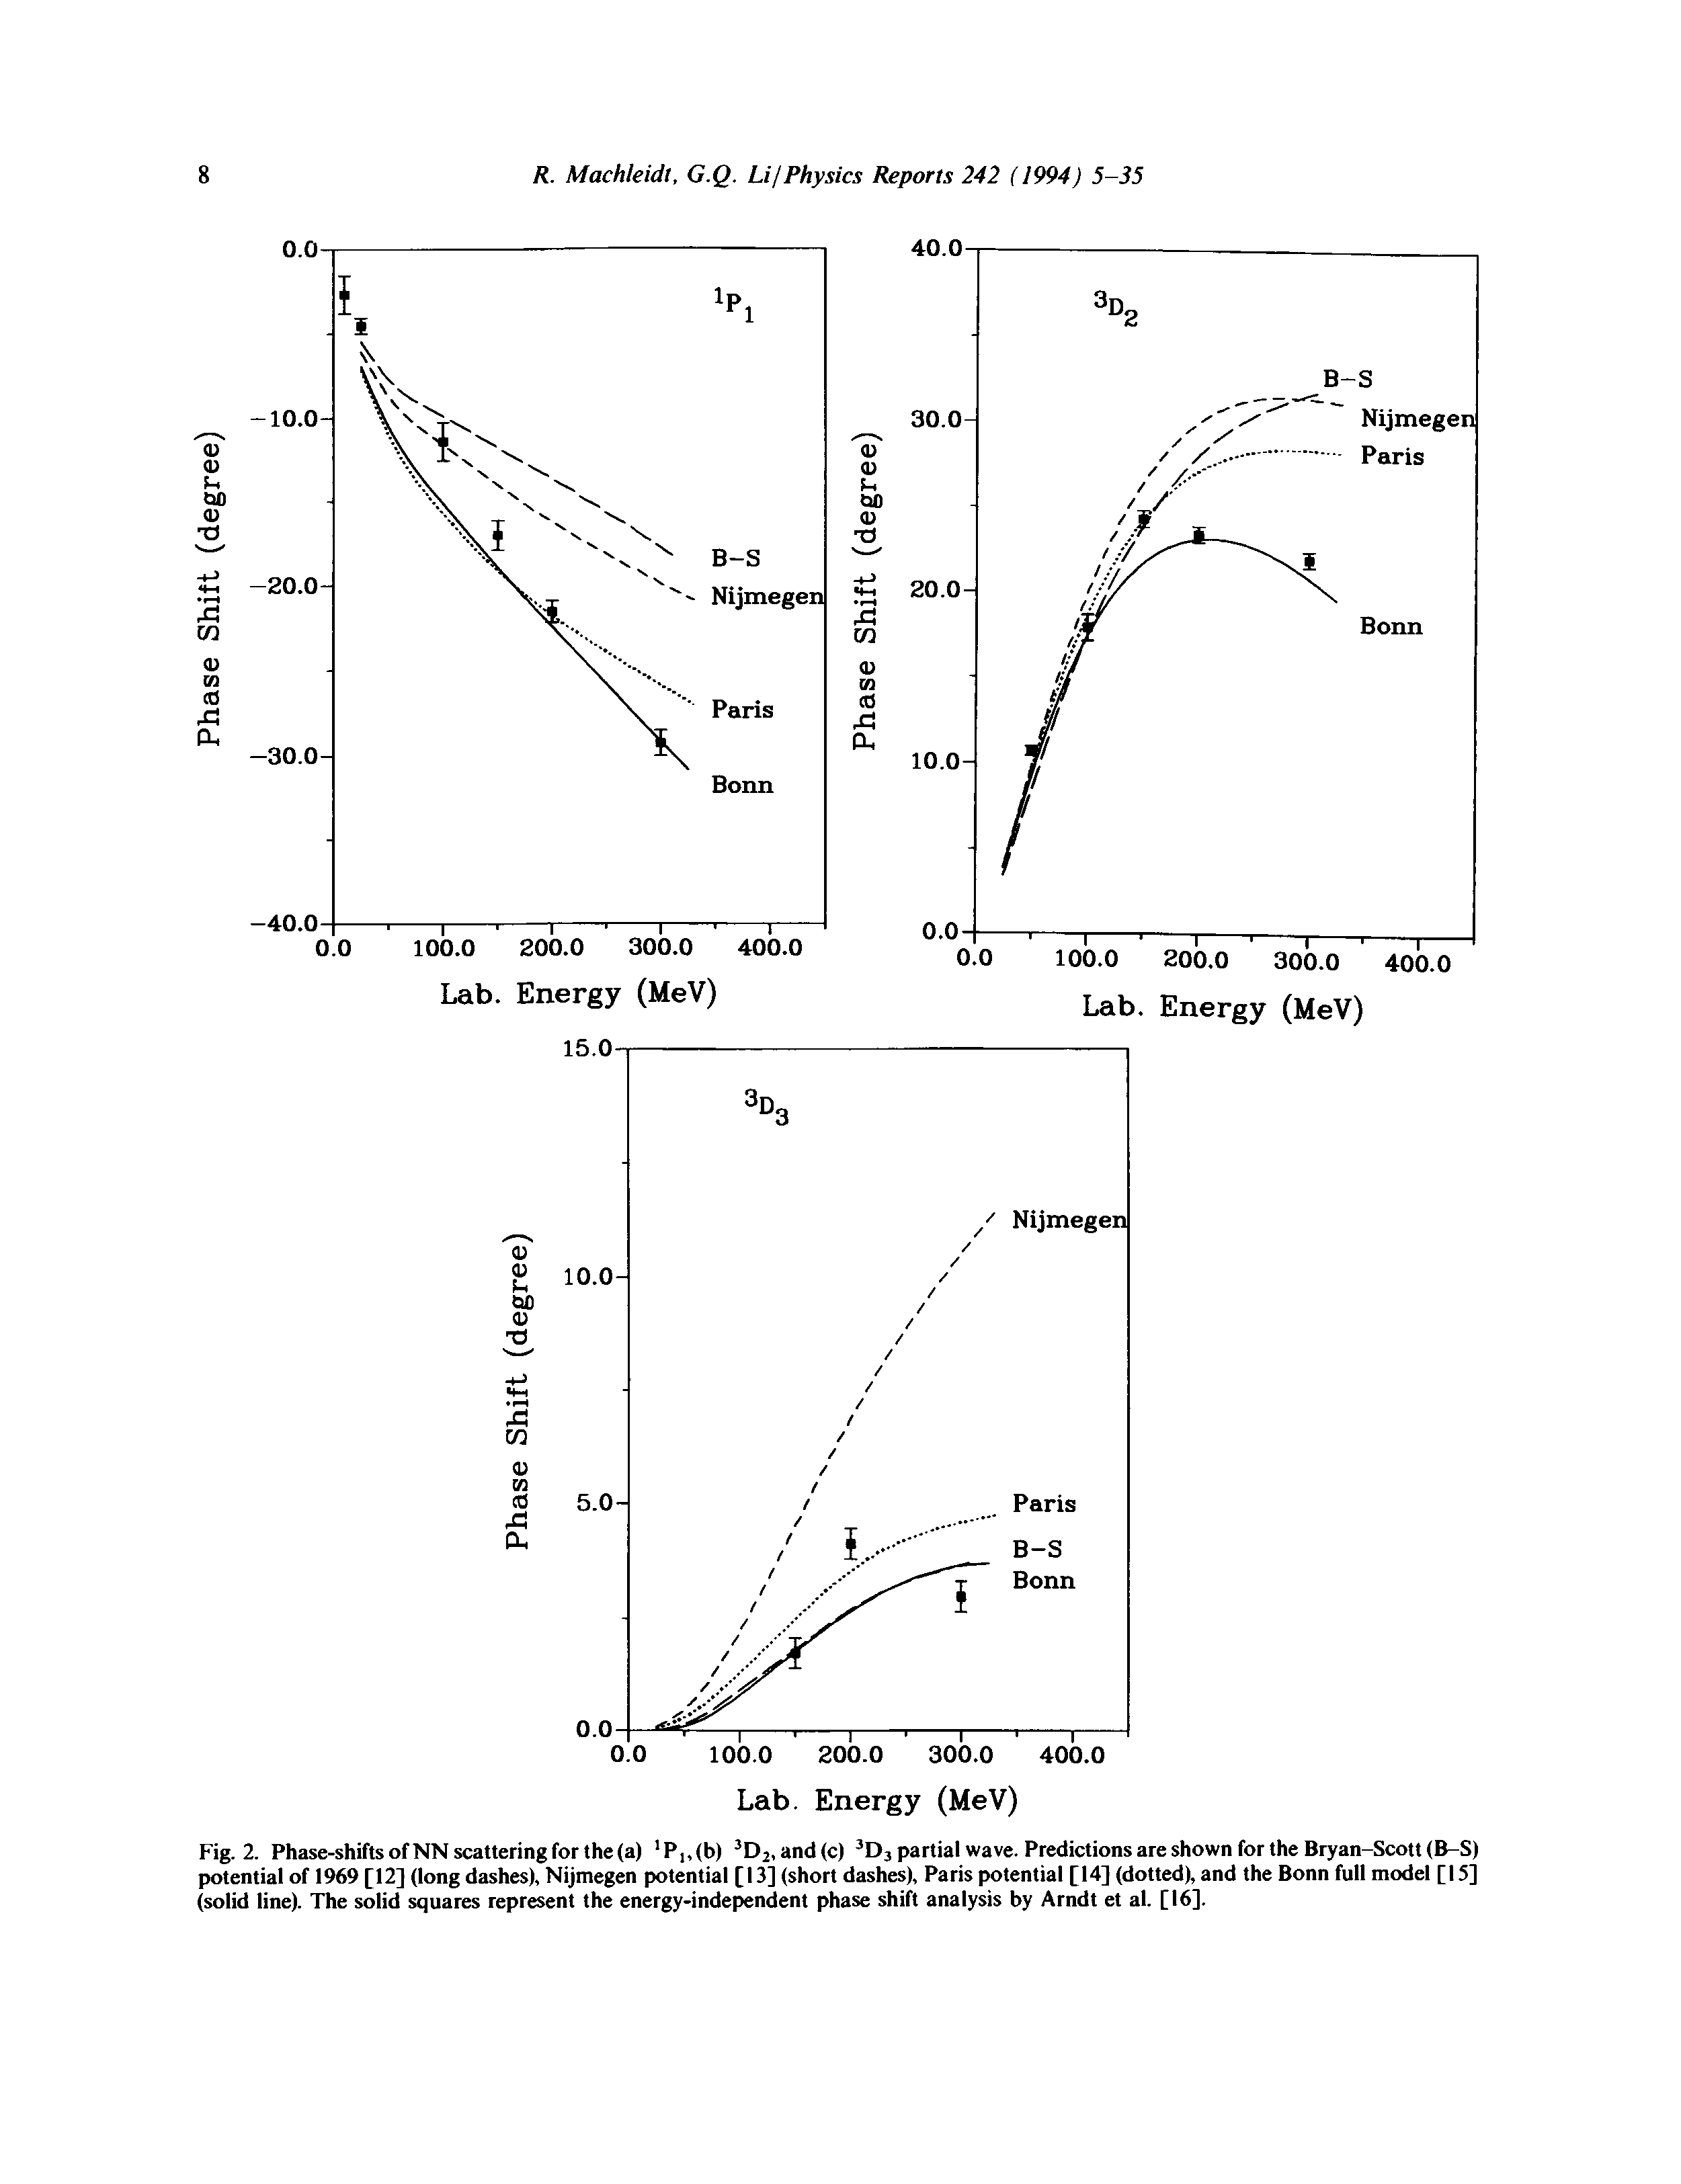 Fig. 2. Phase-shifts of NN scattering for the (a) Pi,(b) and(c) partial wave. Predictions are shown for the Bryan-Scott (B-S) potential of 1969 [12] (long dashes), Nijmegen potential [13] (short dashes), Paris potential [14] (dotted), and the Bonn full model [15] (solid line). The solid squares represent the energy-independent phase shift analysis by Arndt et al. [16].